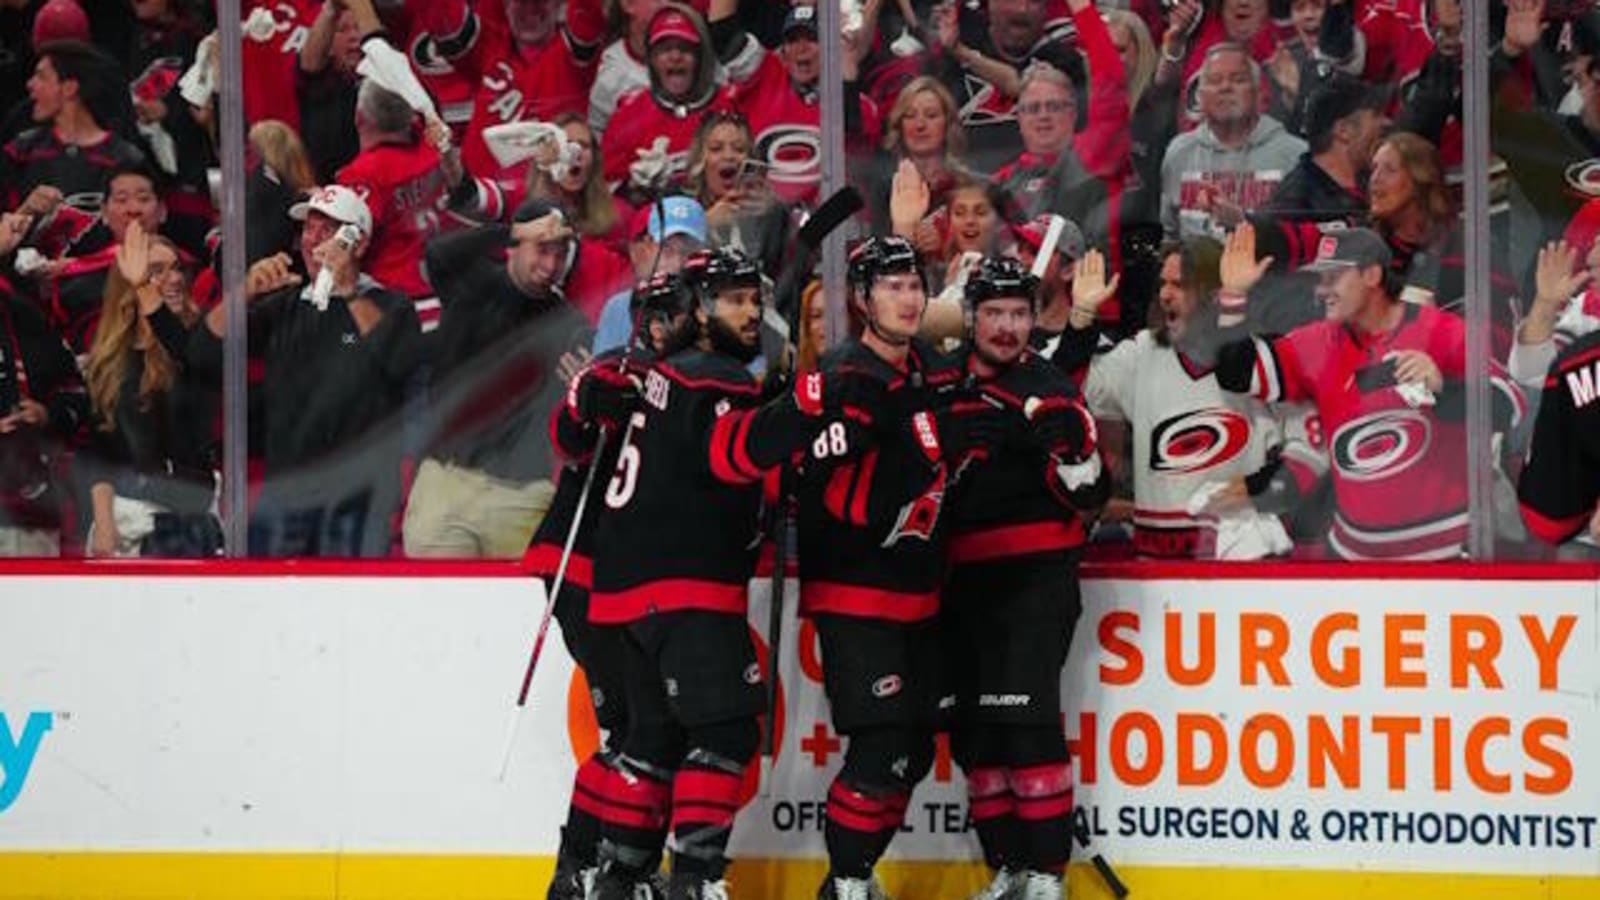 NHL Rumors: Changes Are Coming with the Carolina Hurricanes